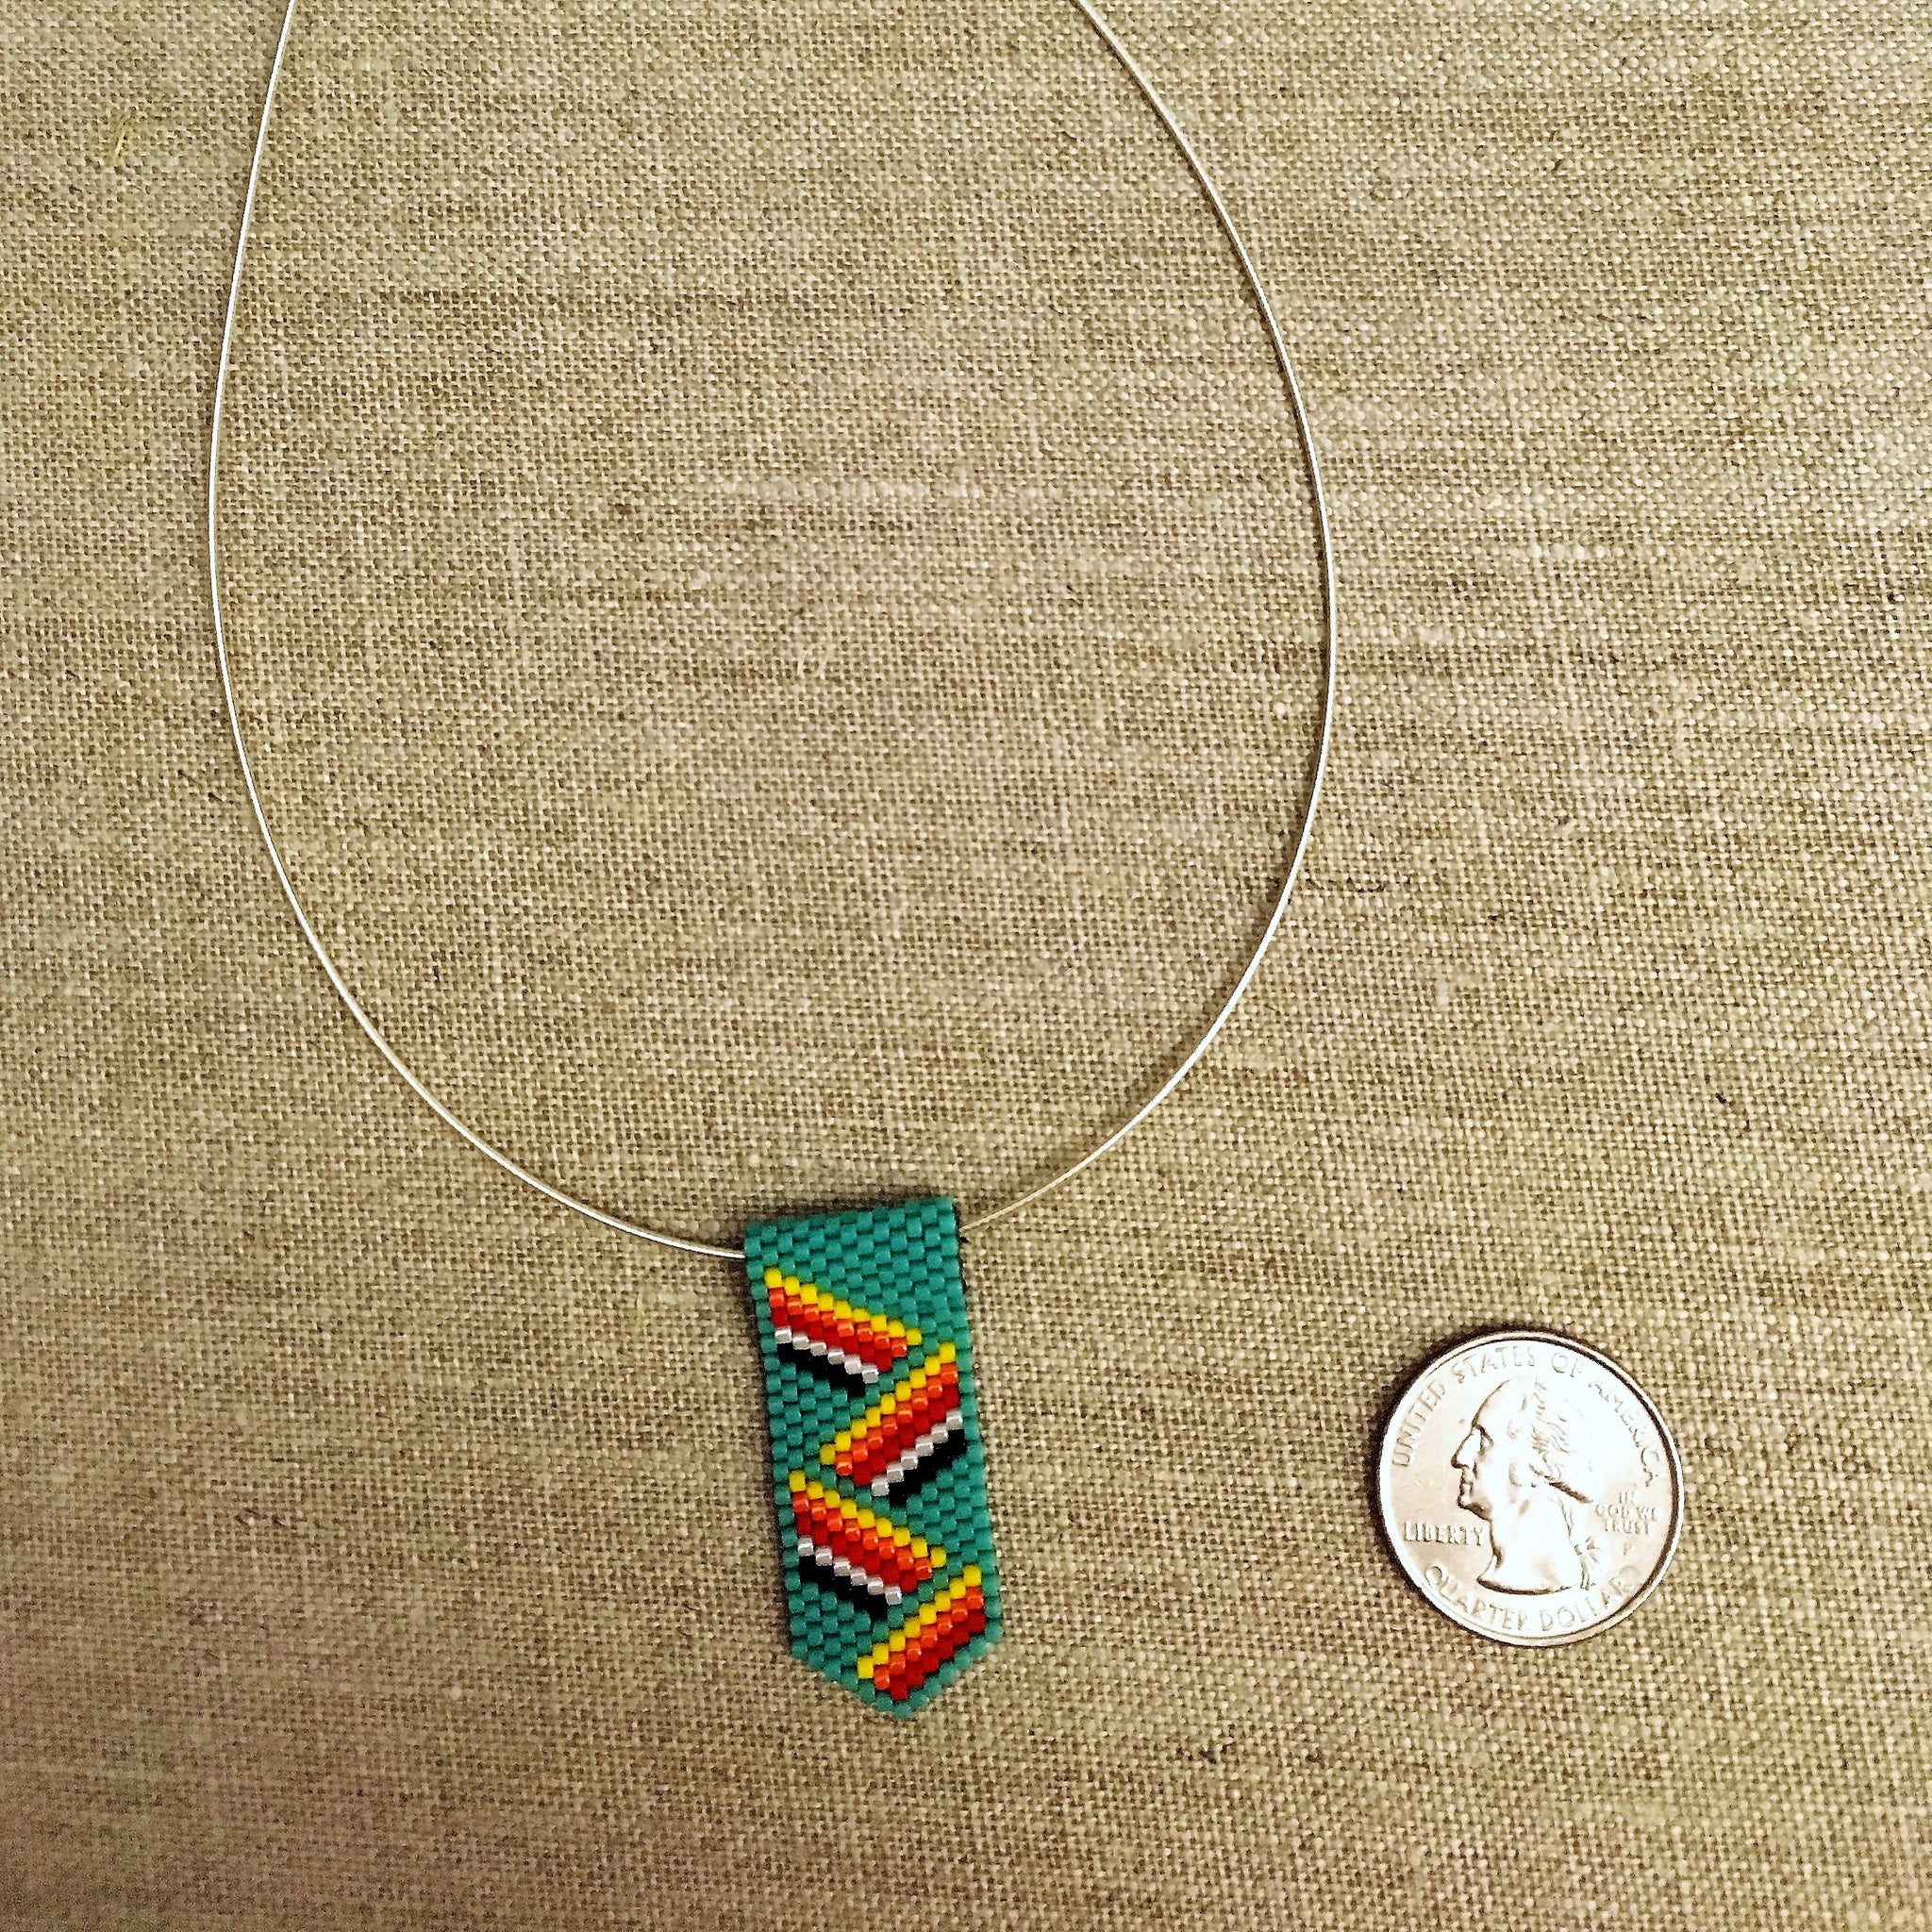 Mini Pendant Necklace in a Turquoise Zig-Zag